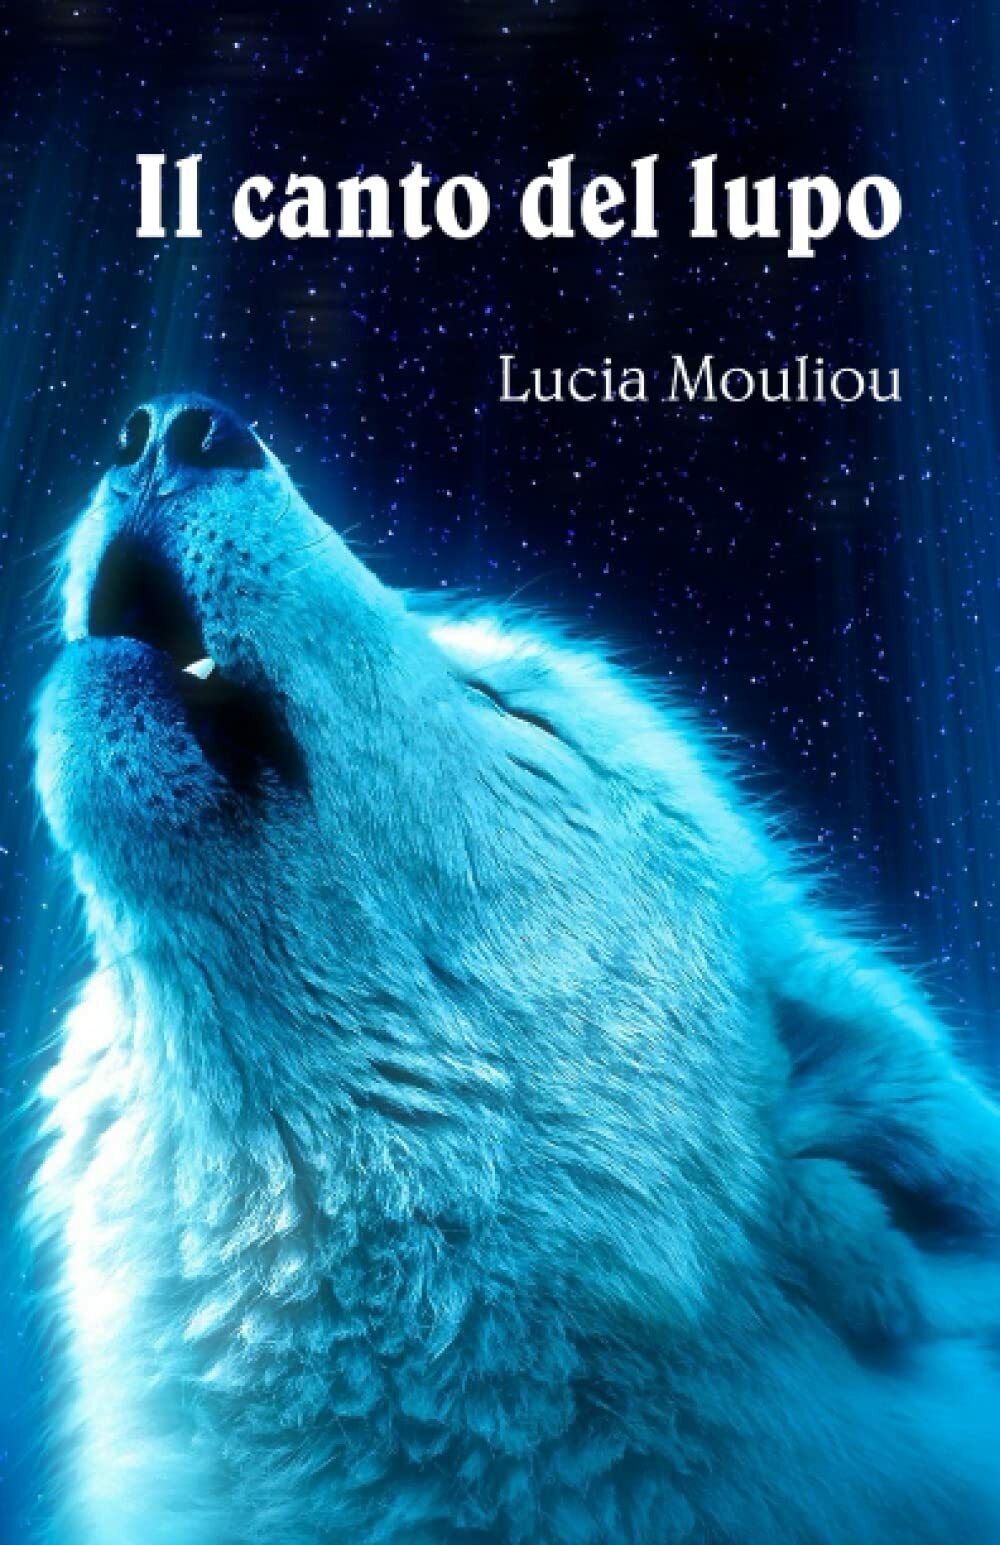 Il canto del lupo di Lucia Mouliou,  2021,  Indipendently Published